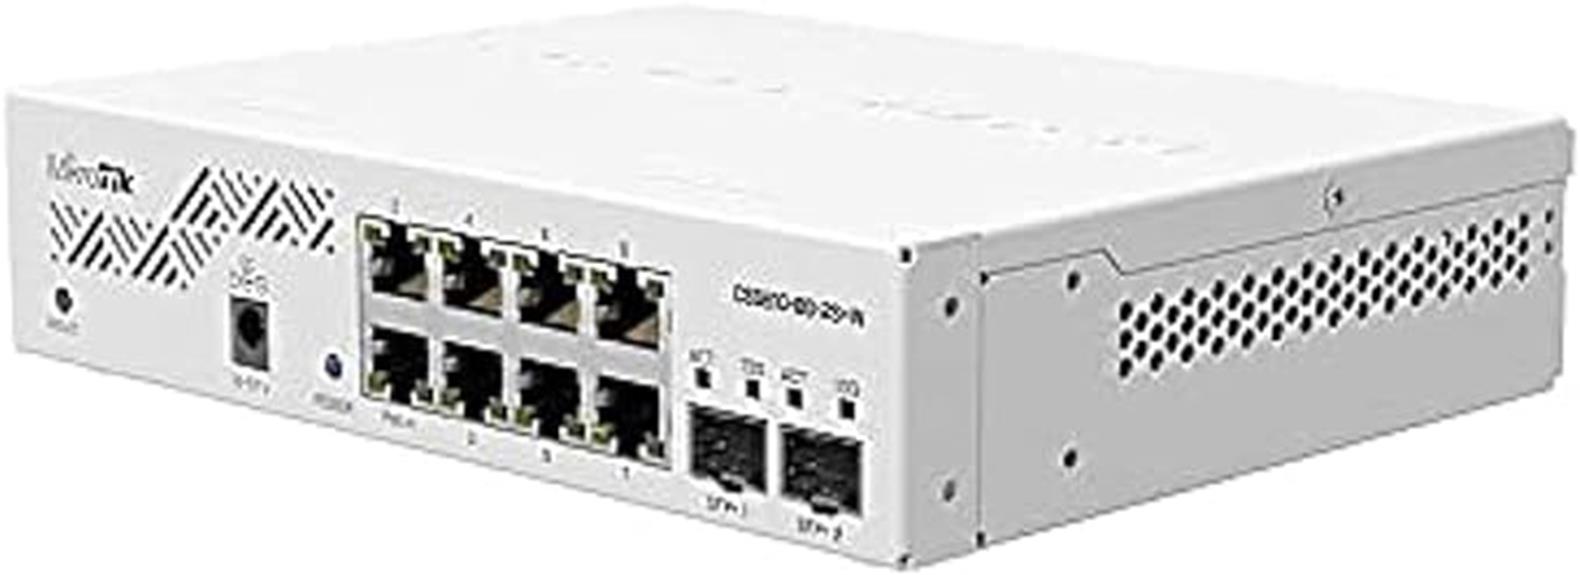 mikrotik css610 8g 2s in reliable performance